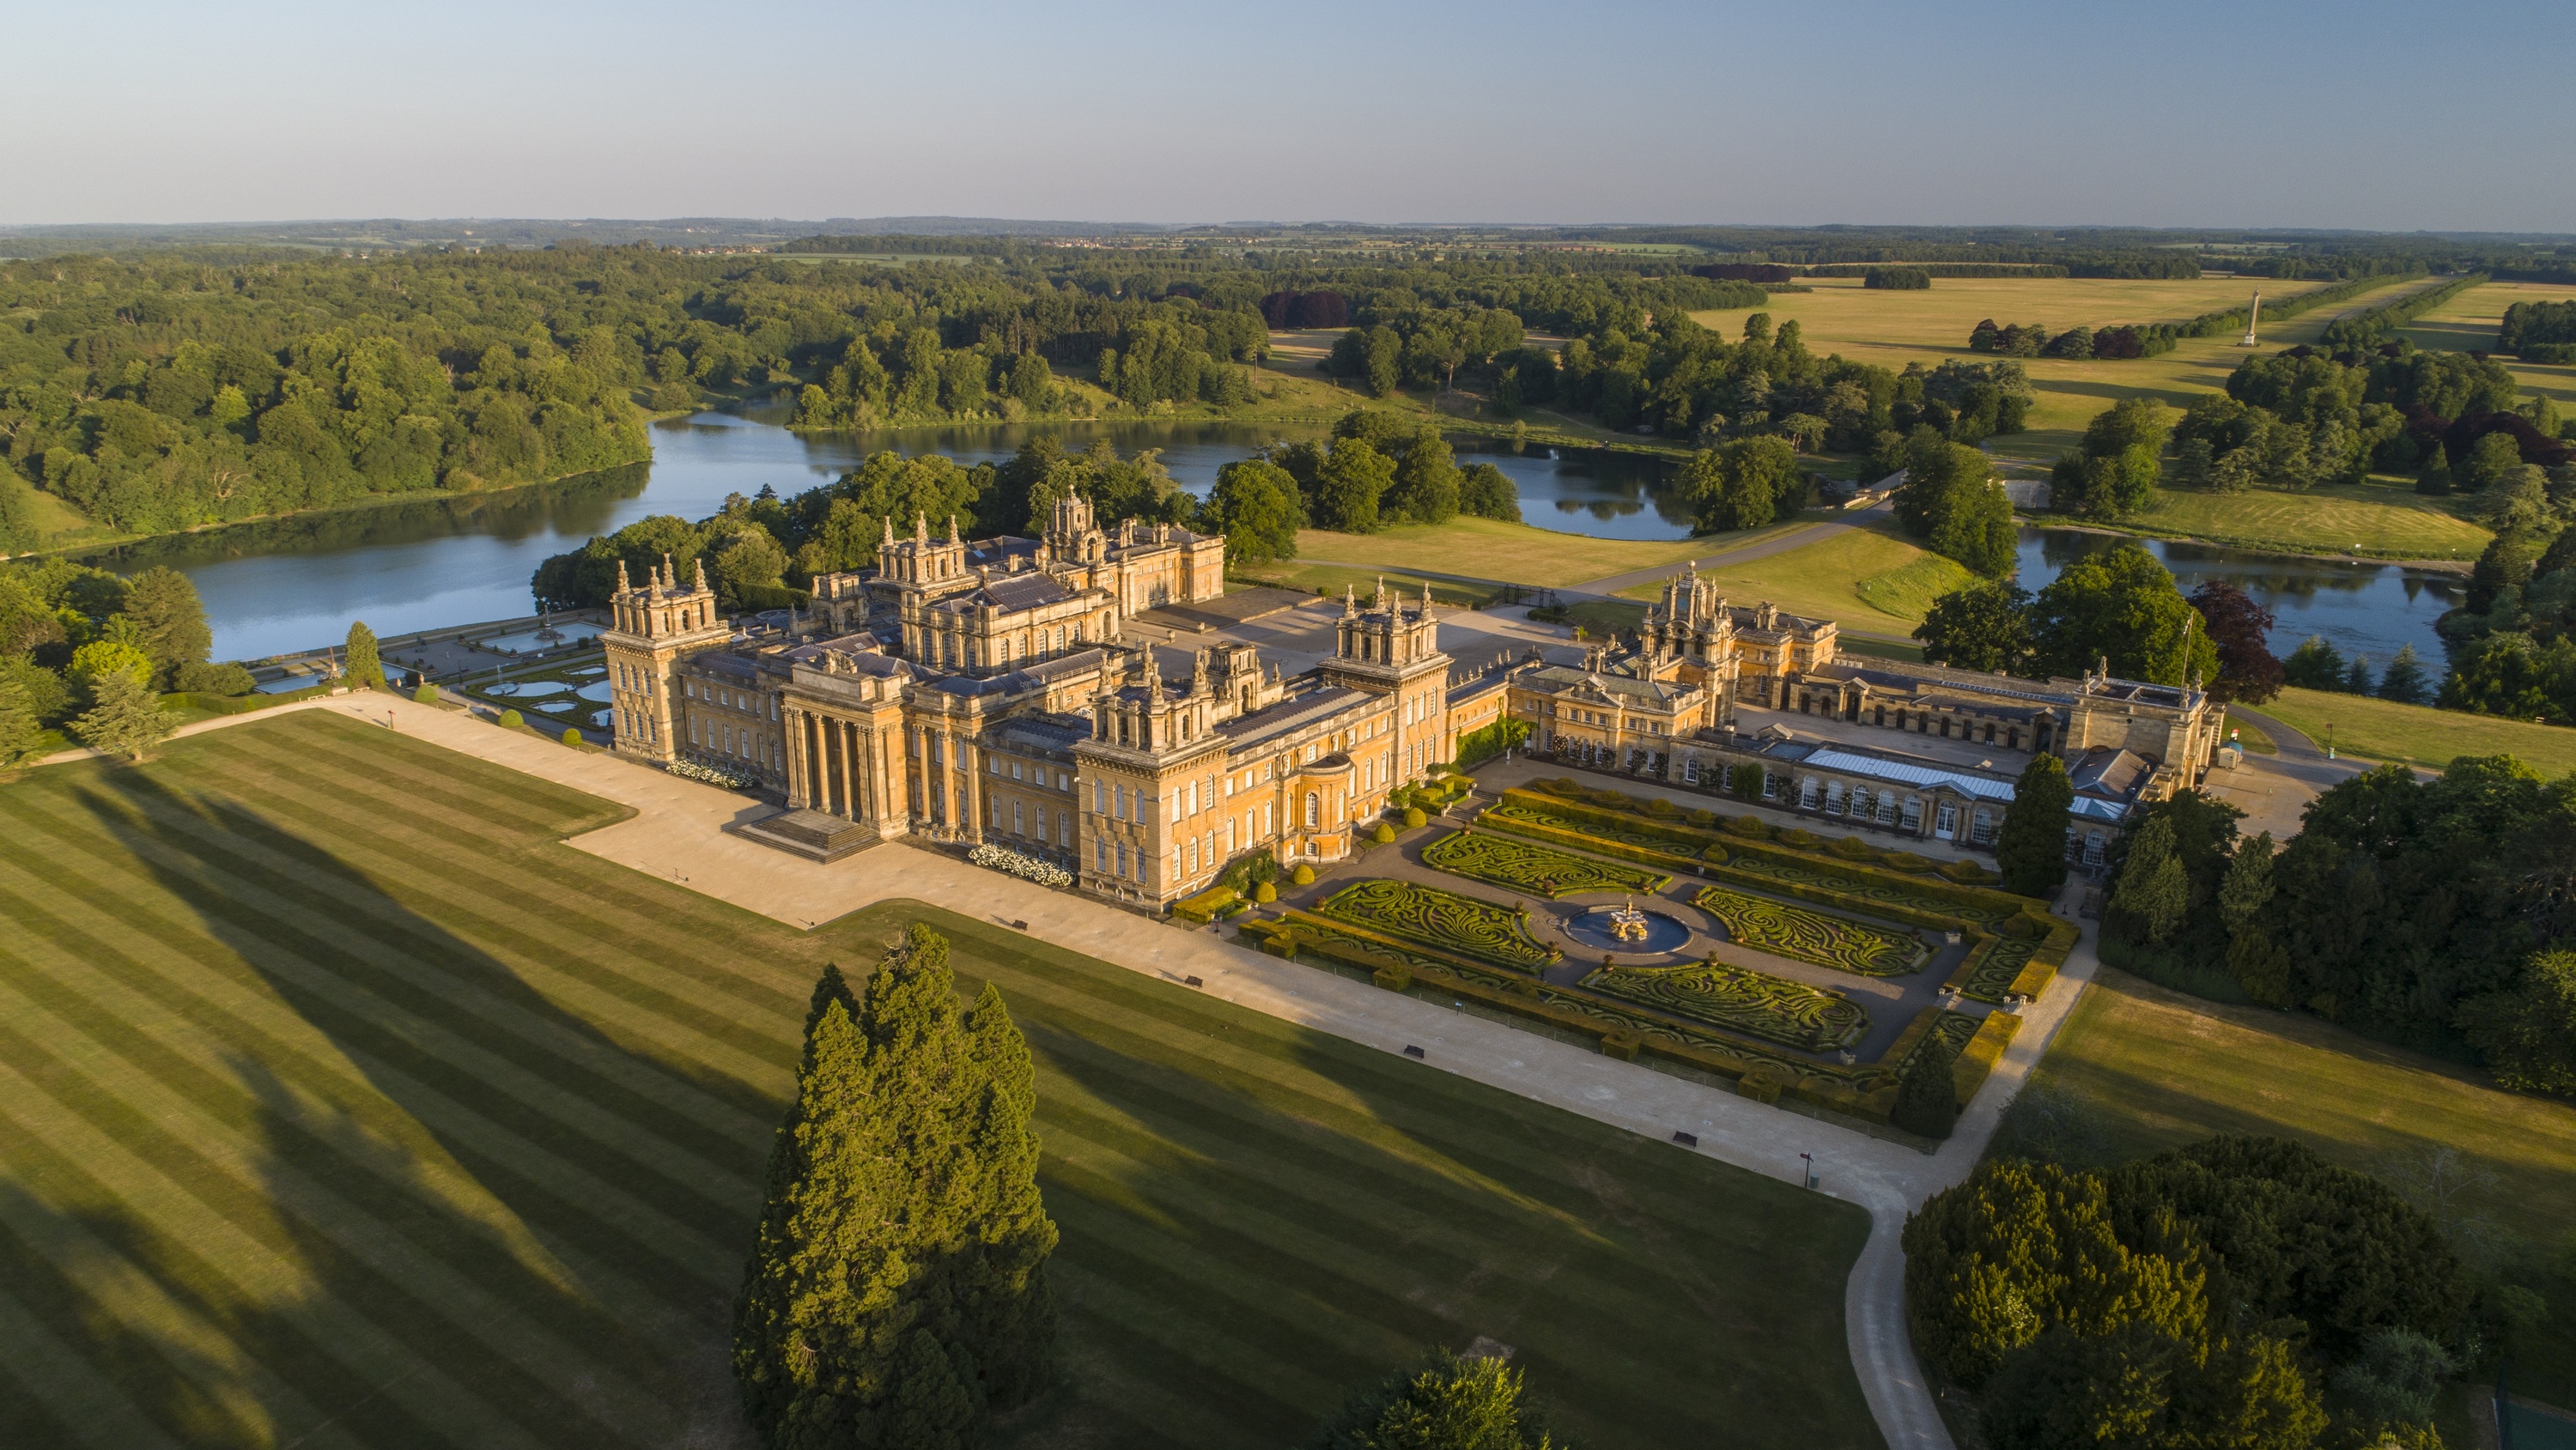 Blenheim Palace Attractions In